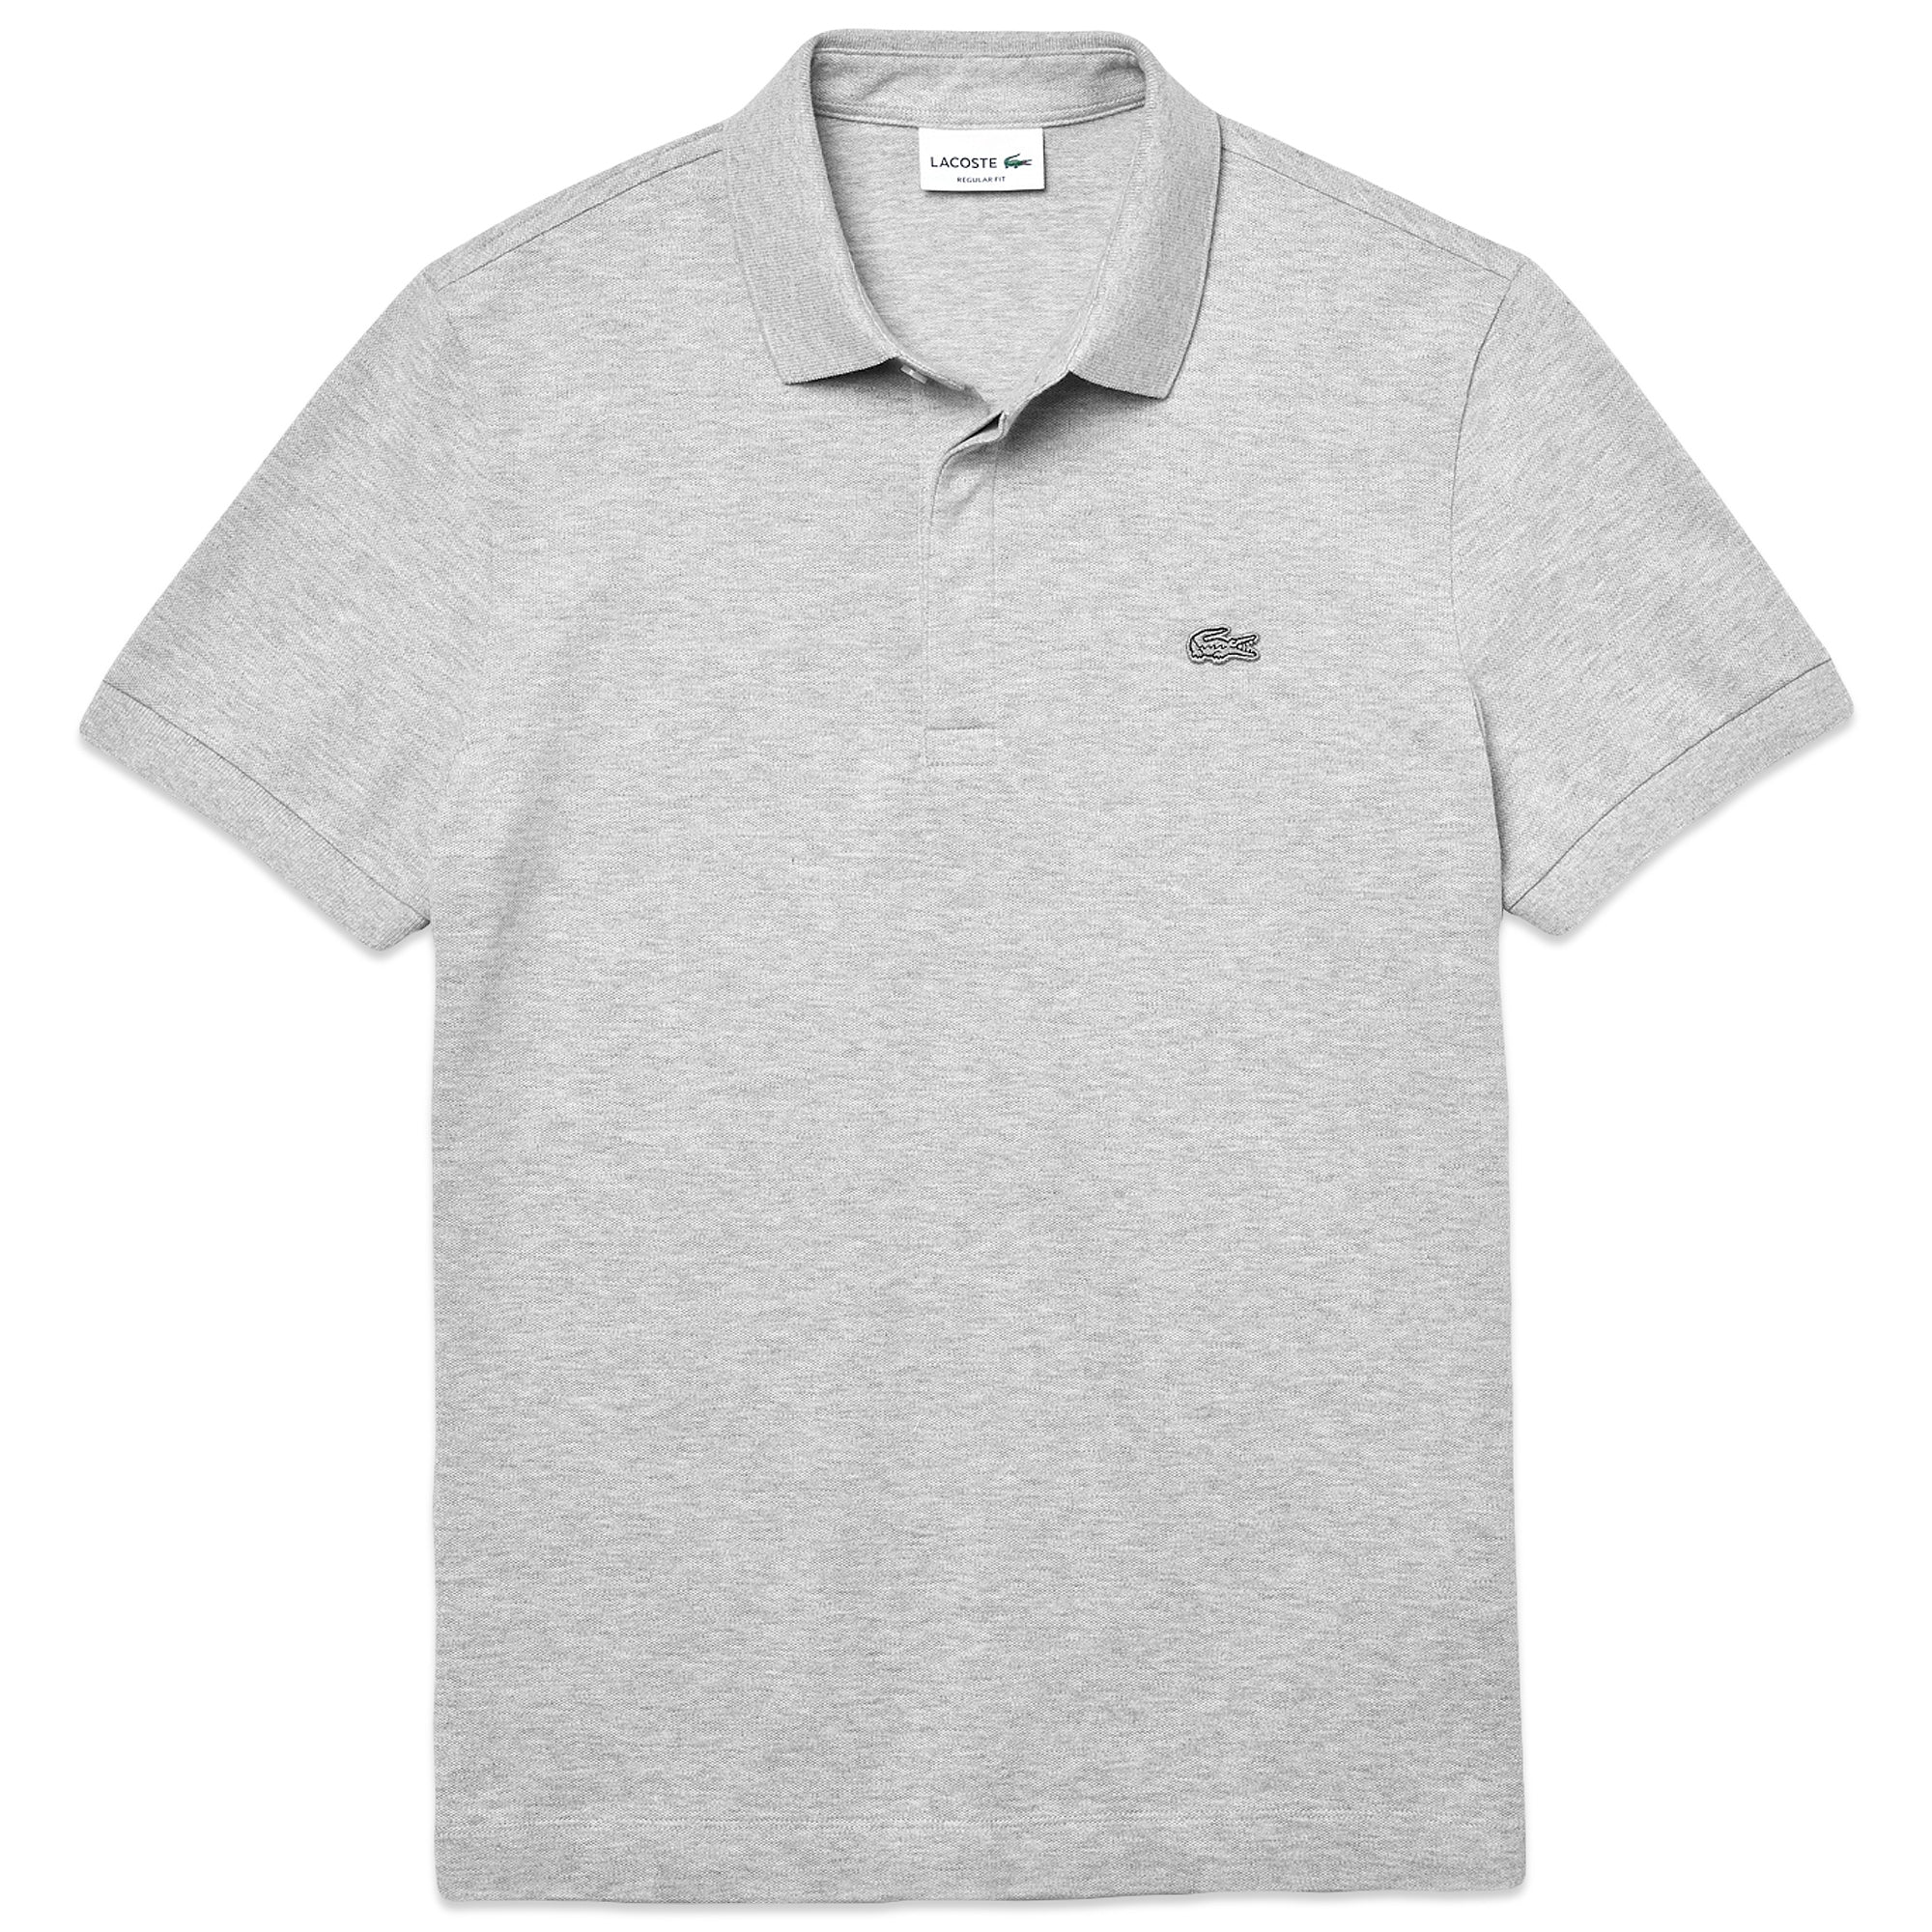 Lacoste Paris Regular Fit Stretch Polo PH5522 - Silver Chine